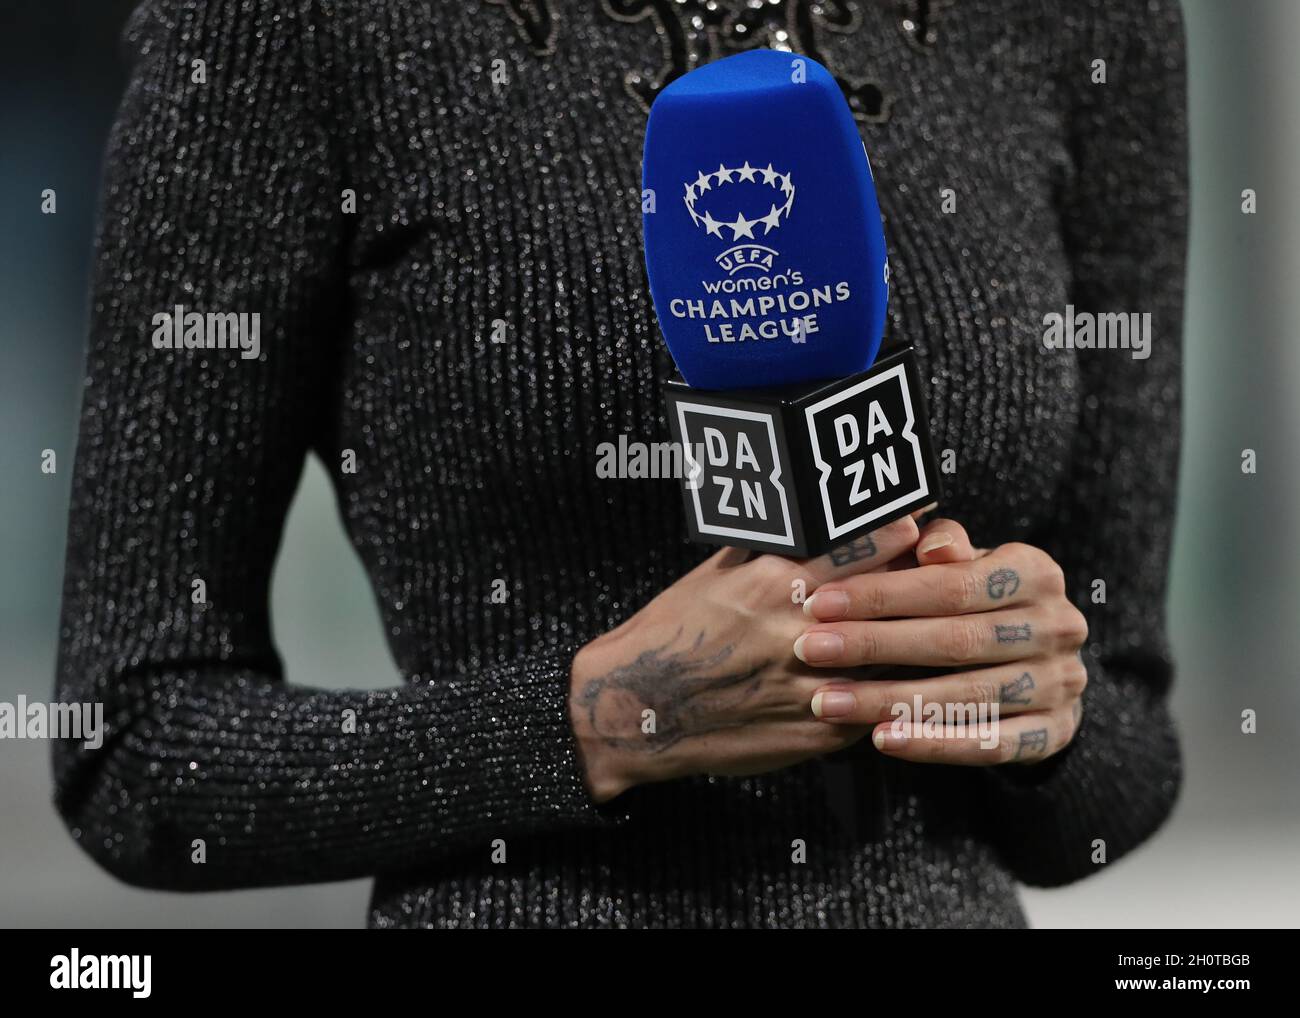 Turin, Italy, 13th October 2021. The tattooed hands of DAZN TV presenter  Ema Stokholma as she holds a DAZN and UEFA Women's Champions League branded  microphone during the UEFA Womens Champions League